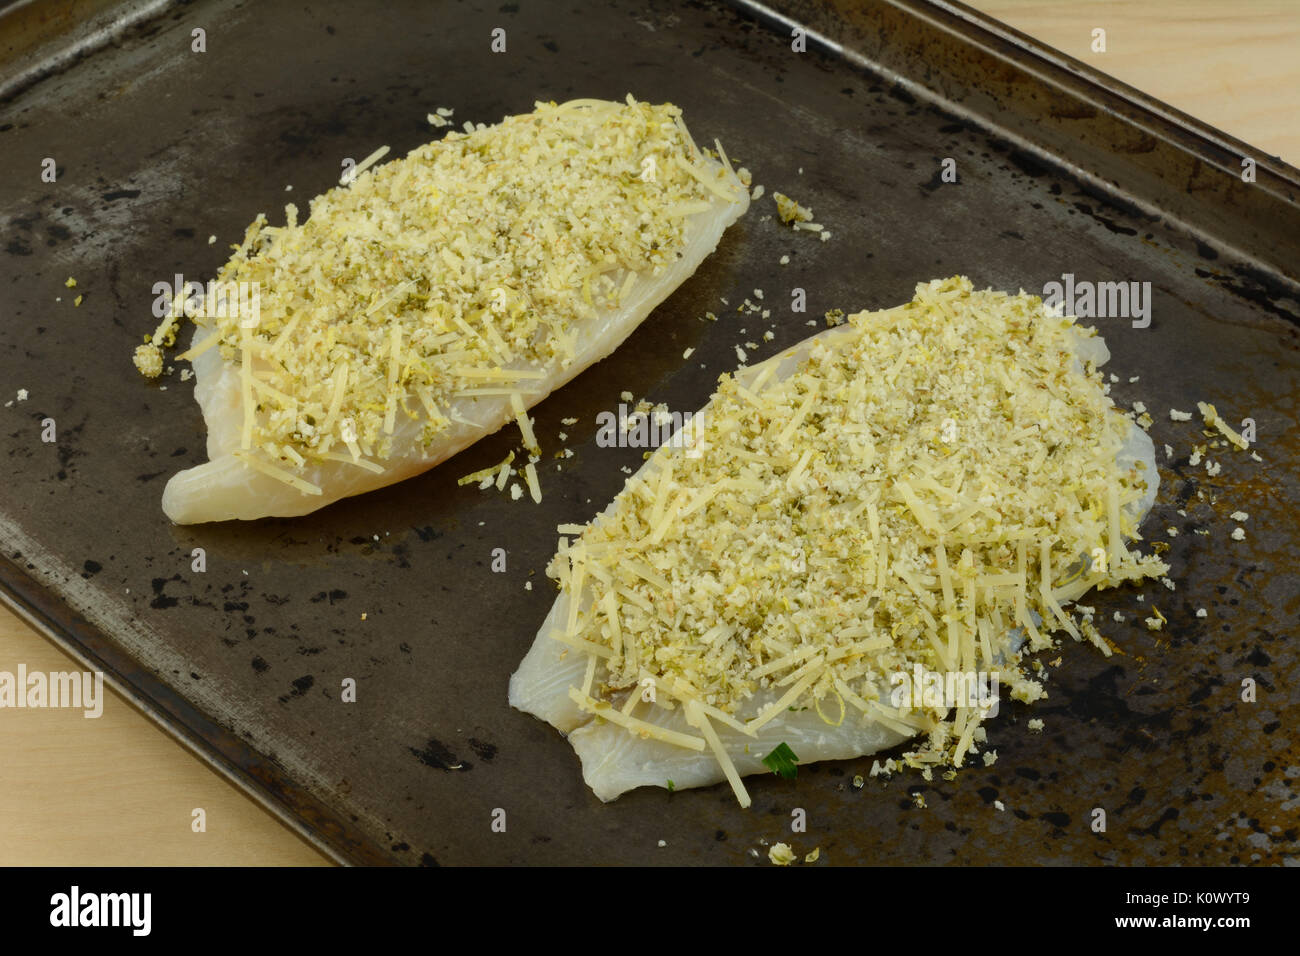 Two raw tilapia fish fillets with parmesan cheese and bread crumb topping on baking sheet Stock Photo